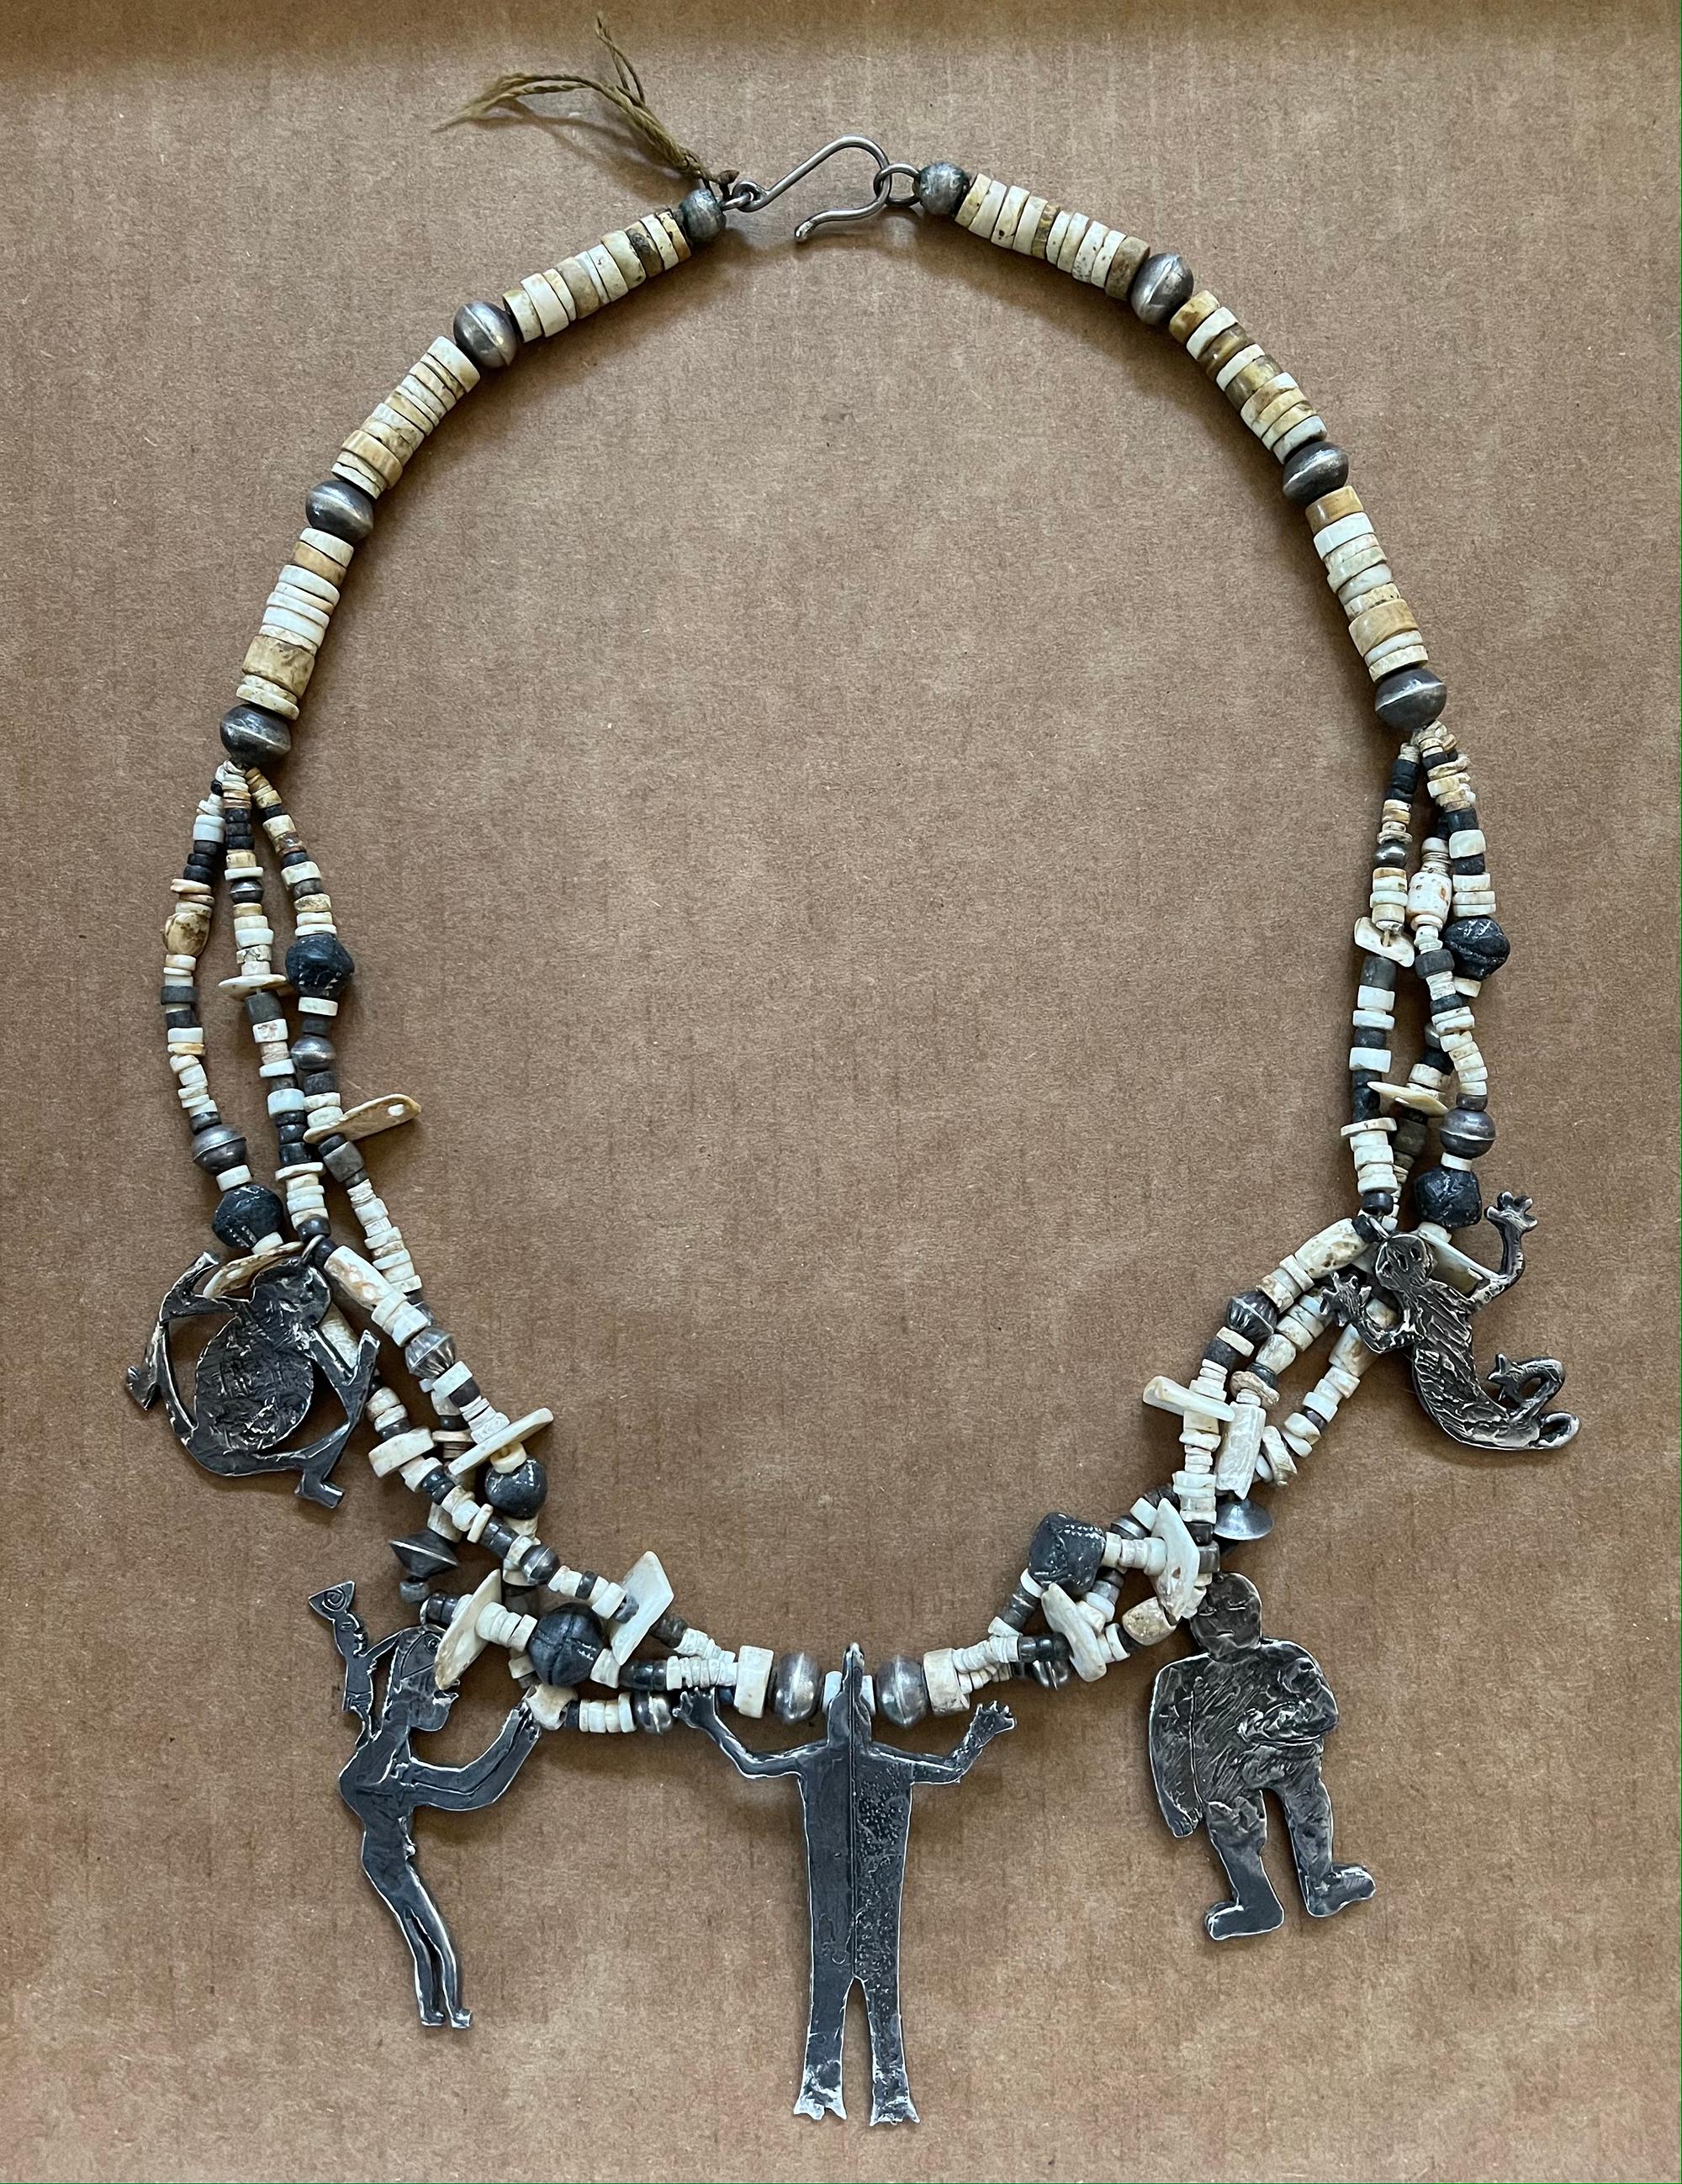 Annette Bird bone, bead, shell and silver tribal necklace

This whimsical necklace was made by Annette R. Bird (1925-2016), a well-known Southern California artist, sculptor, jeweler and founder of the Bead Society. She used her silver-casting